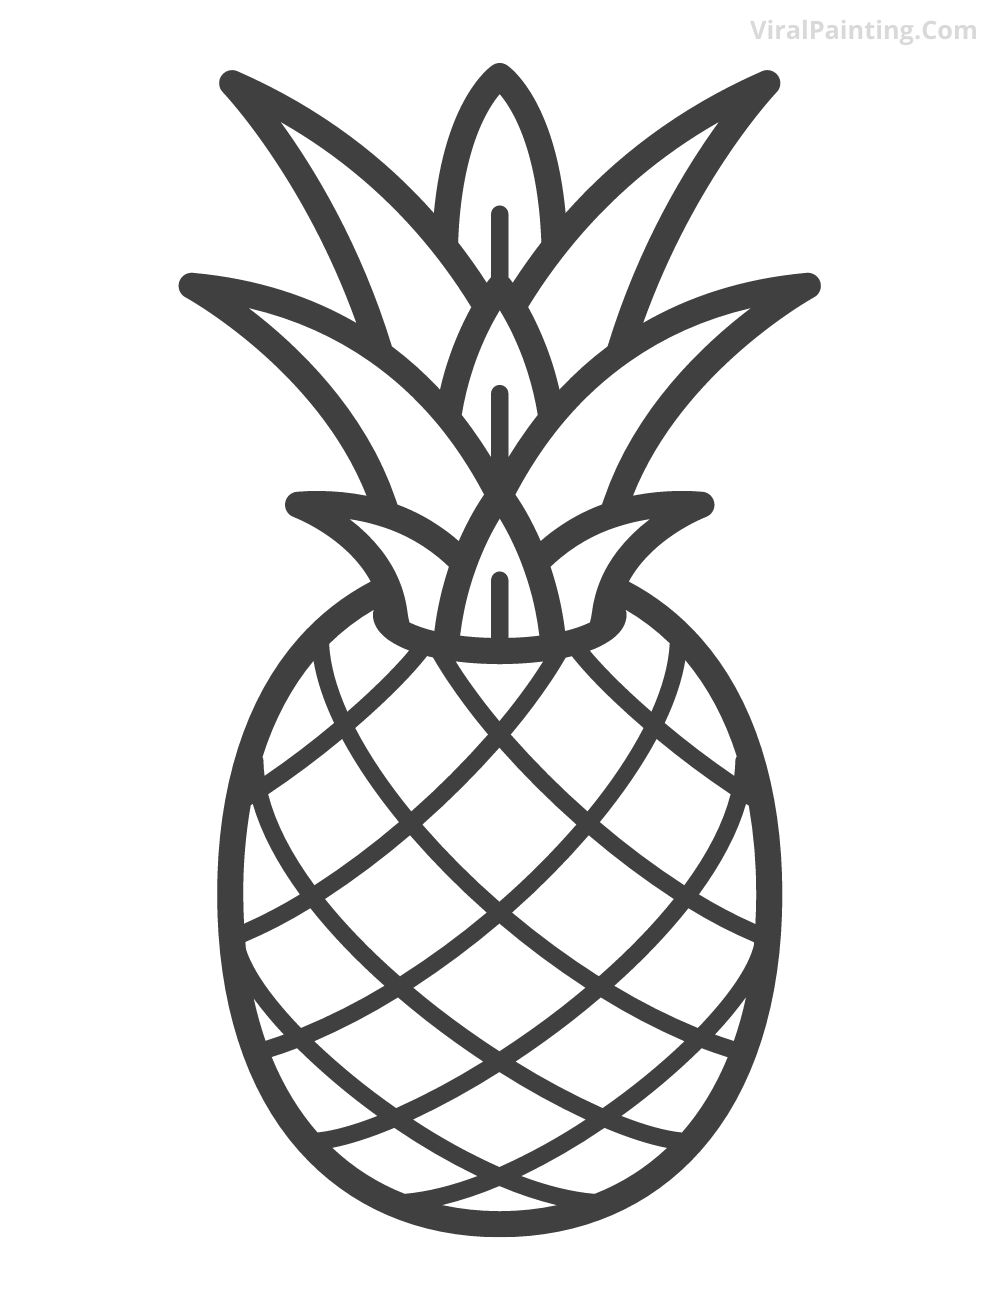 Simple and Easy pineapple drawing ideas for experts by viral painting.com (5)